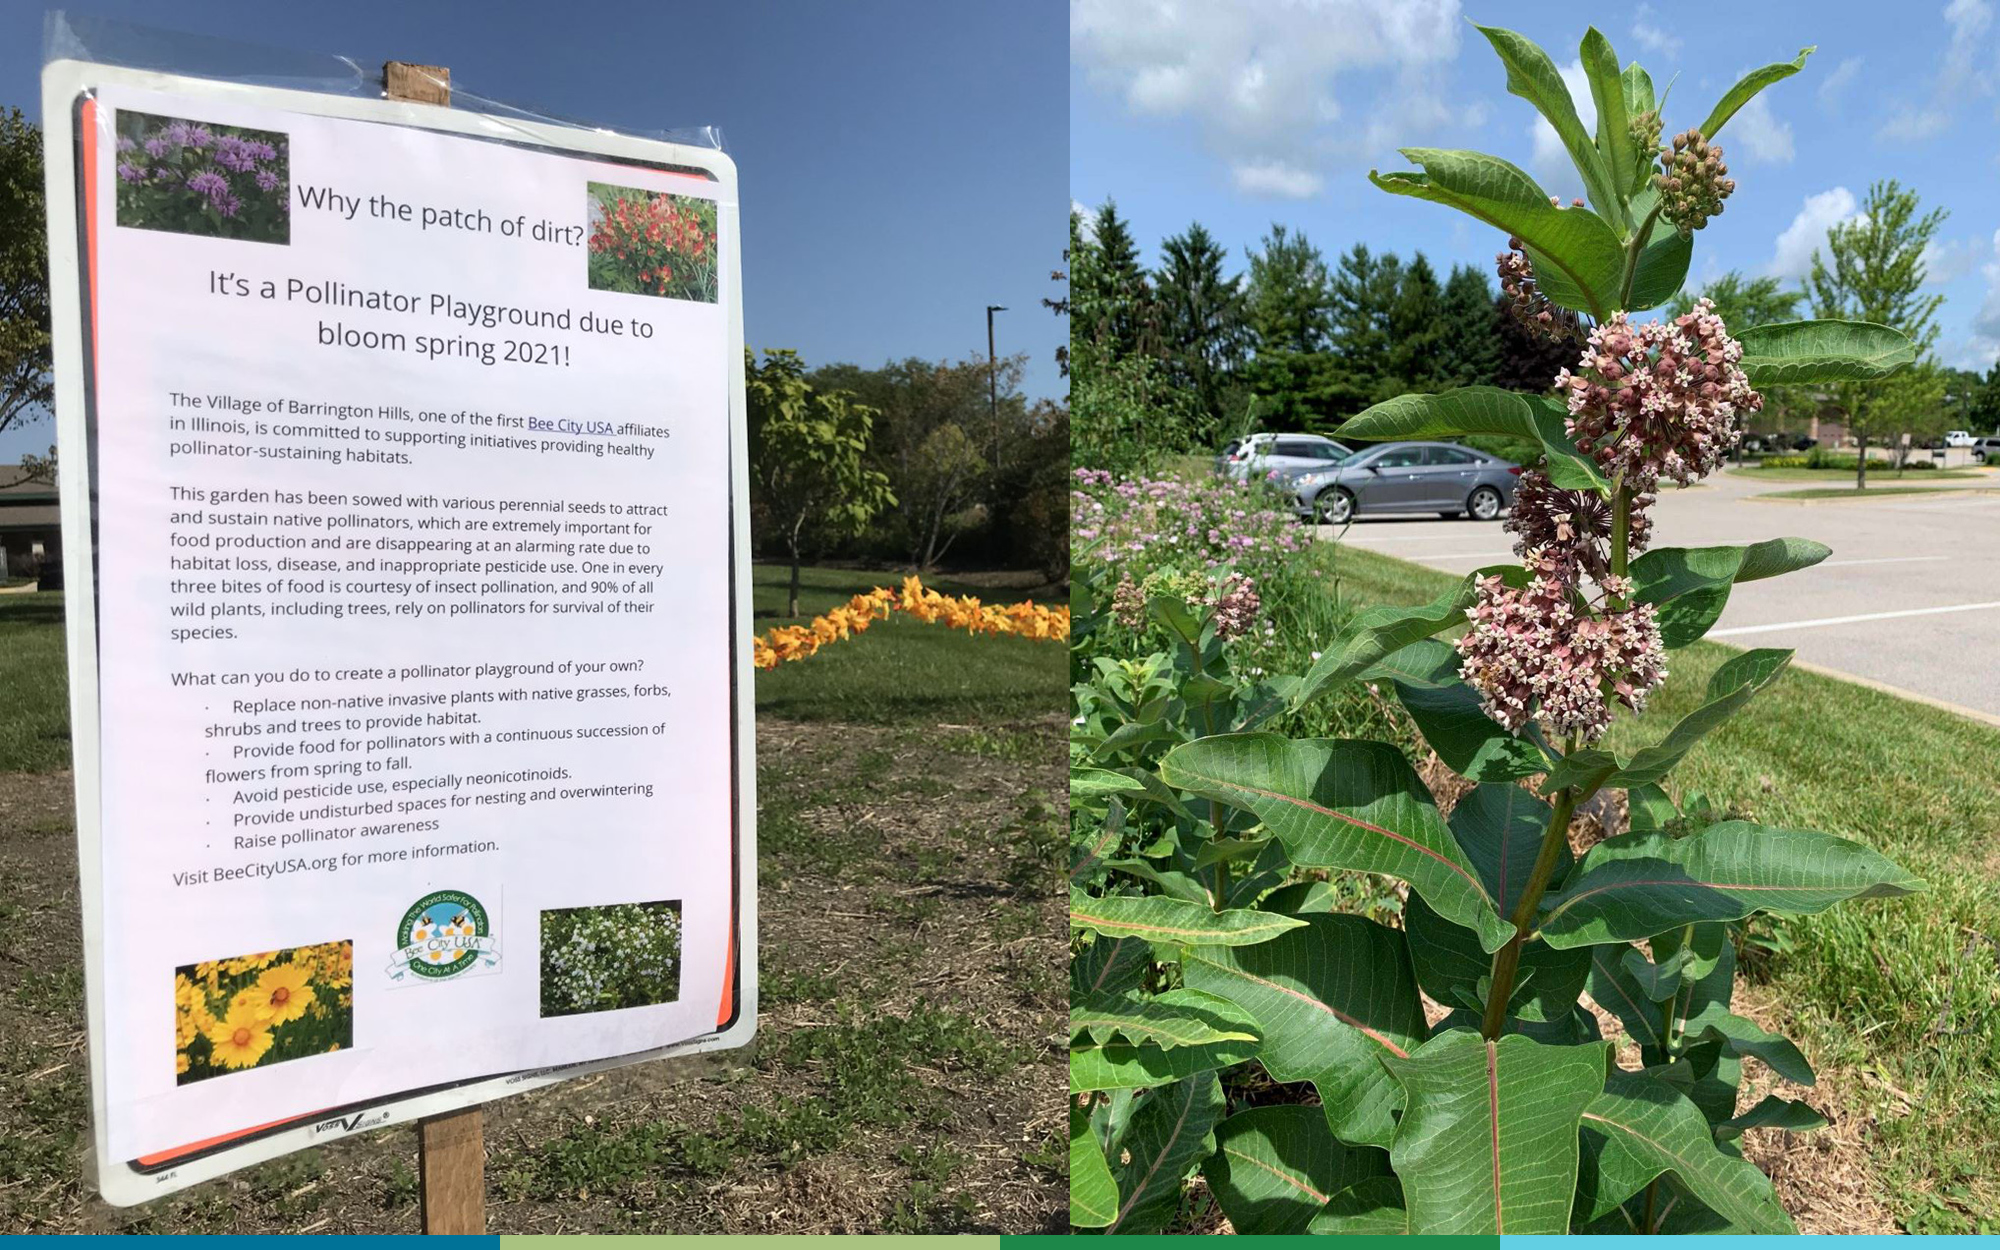 A composite image: on the left is a sign that explains that the patch of bare dirt is being made into a pollinator garden. On the right, is a mature milkweed plant with large green leaves and pink flowers.